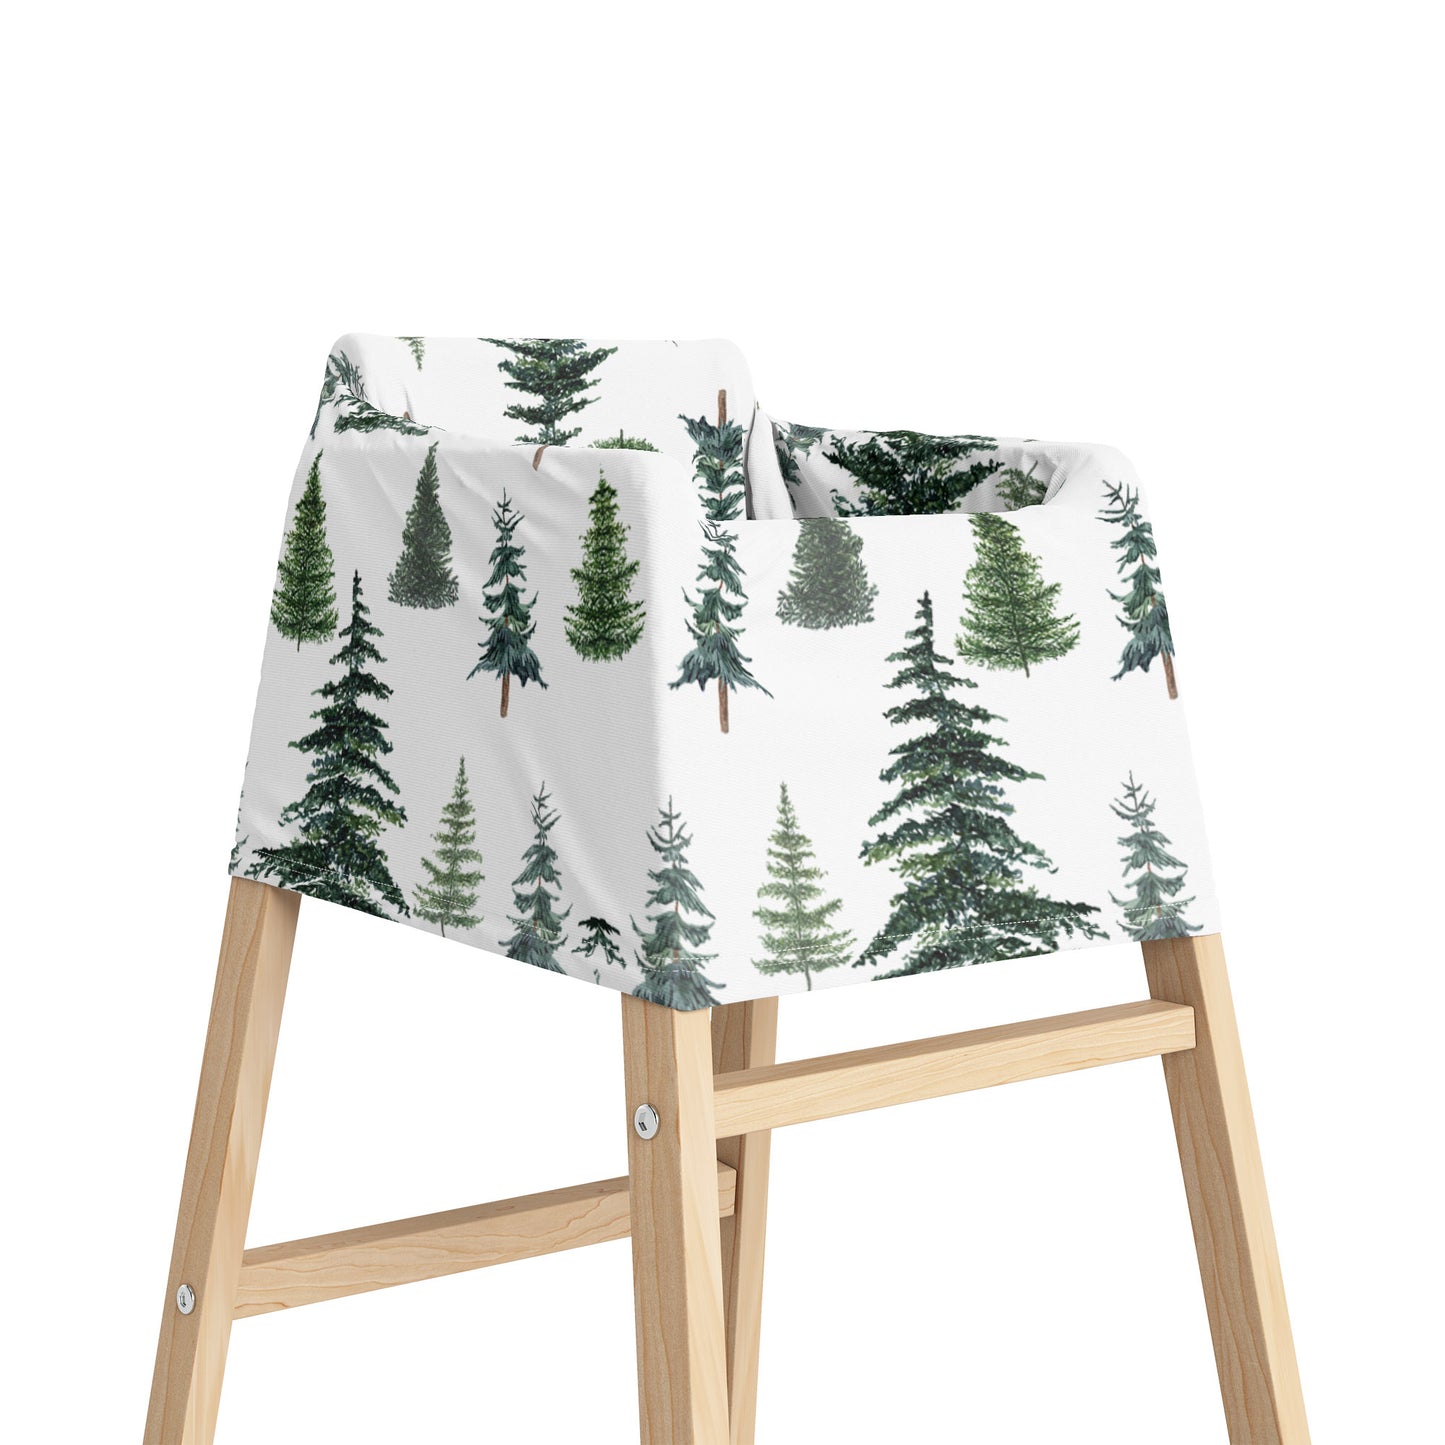 Pine Trees Car Seat Cover, Woodland Nursing Cover - The Forest